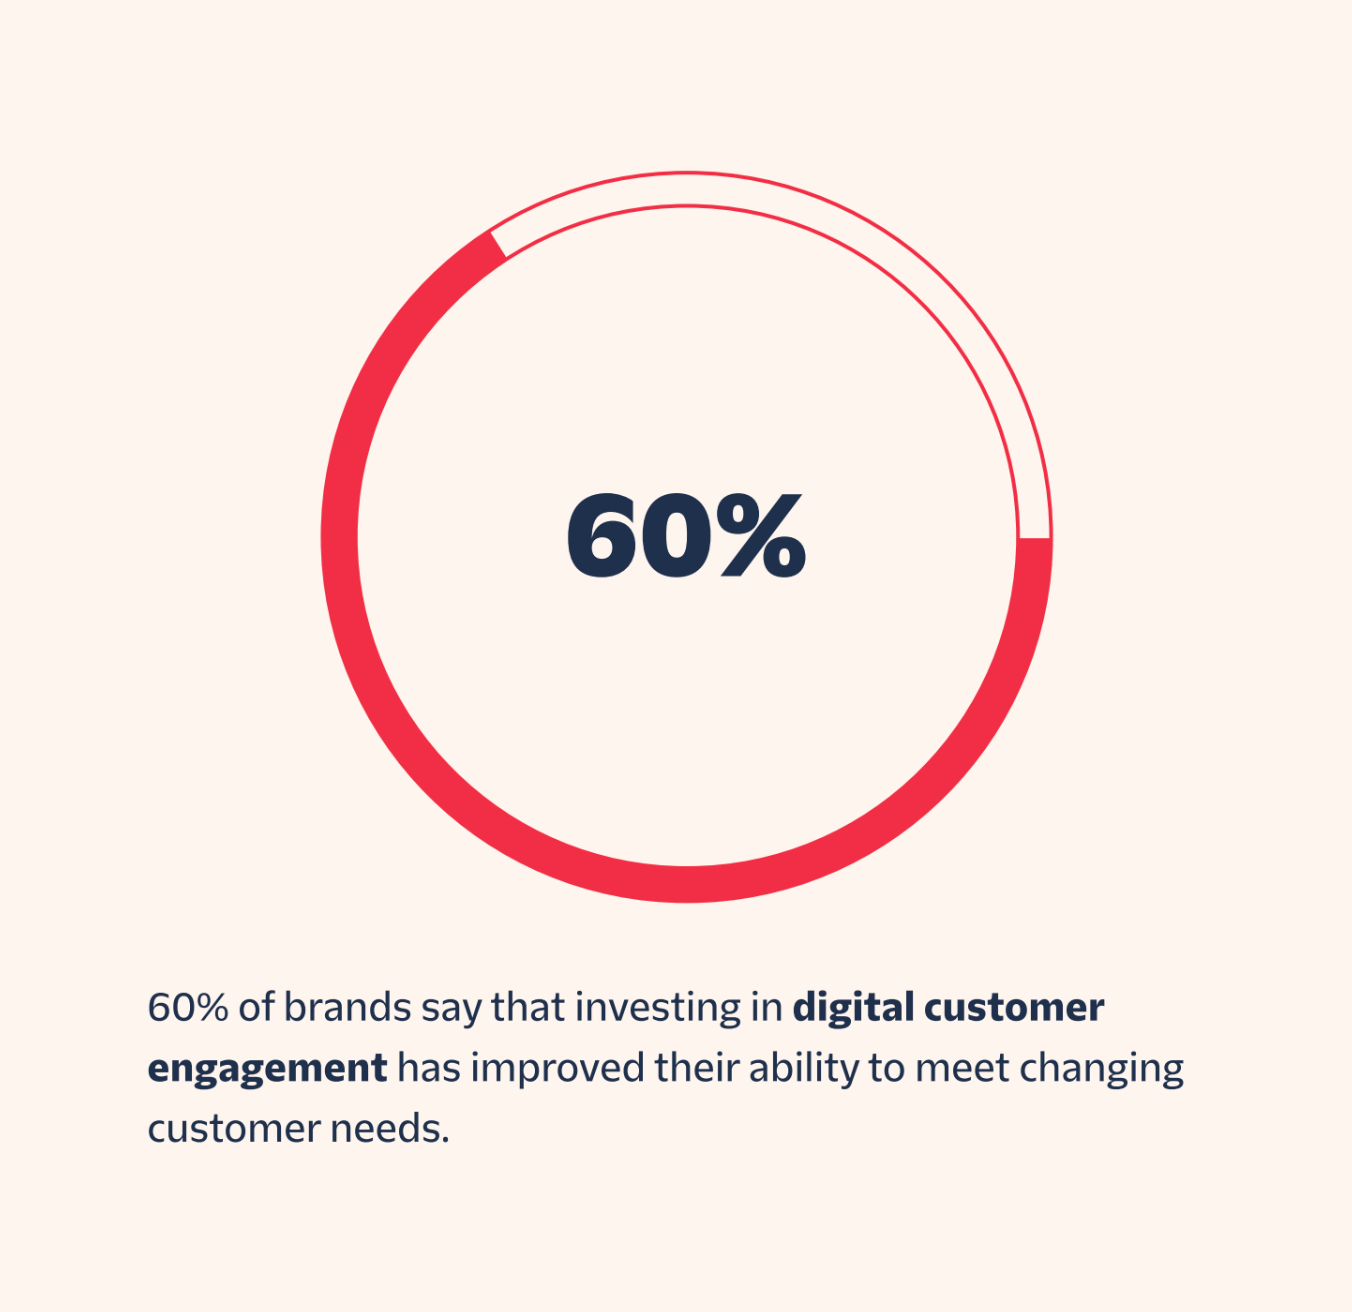 60% of brands say that investing in digital customer engagement has improved their ability to meet changing customer needs.